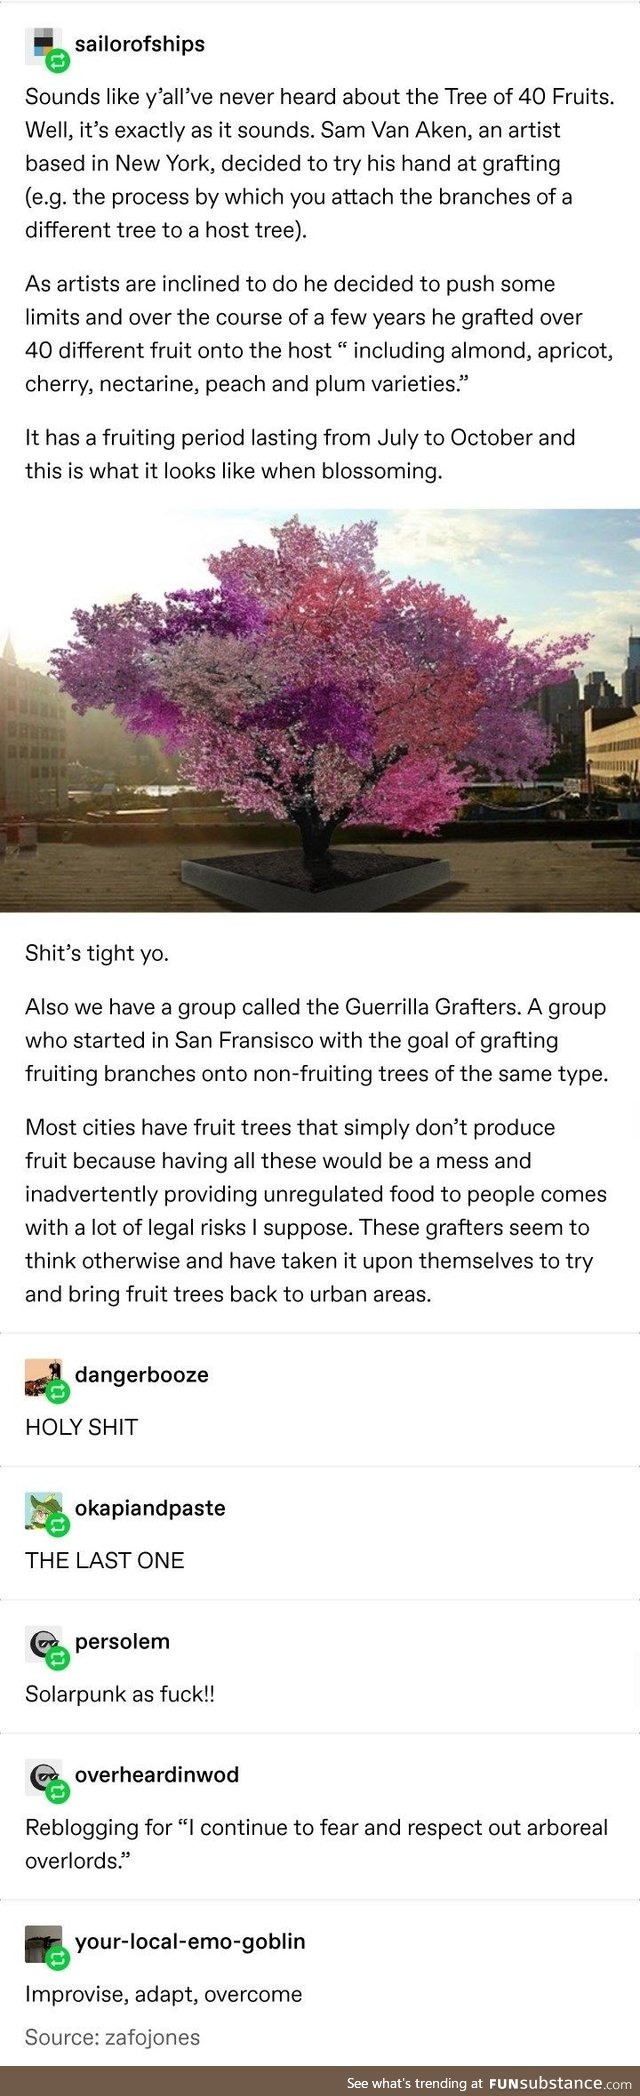 A Tree of 40 Stone Fruits